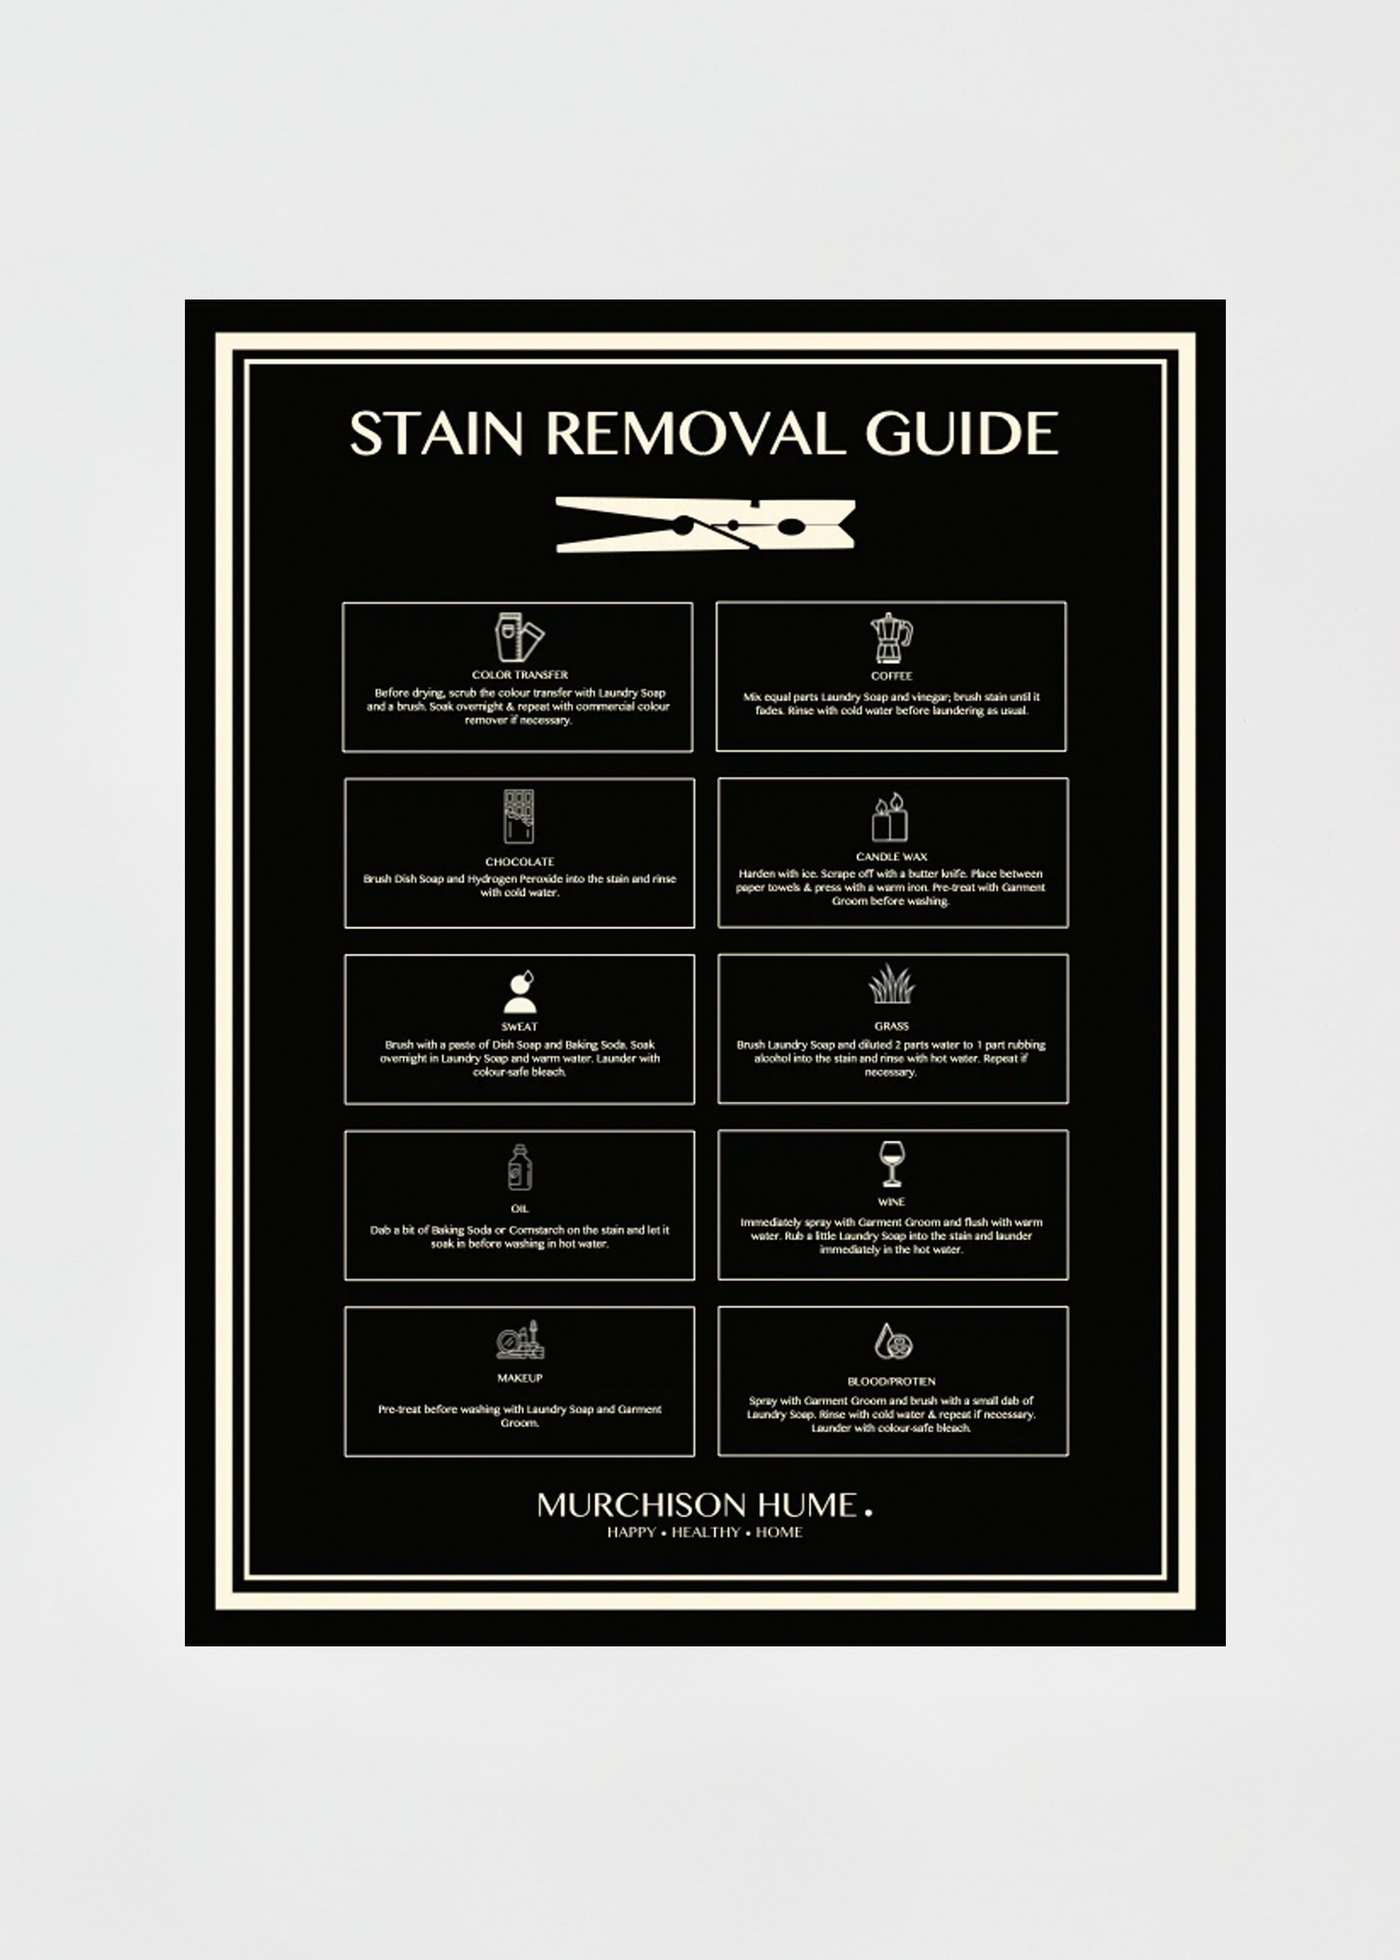 Universal Stain Removal Guide